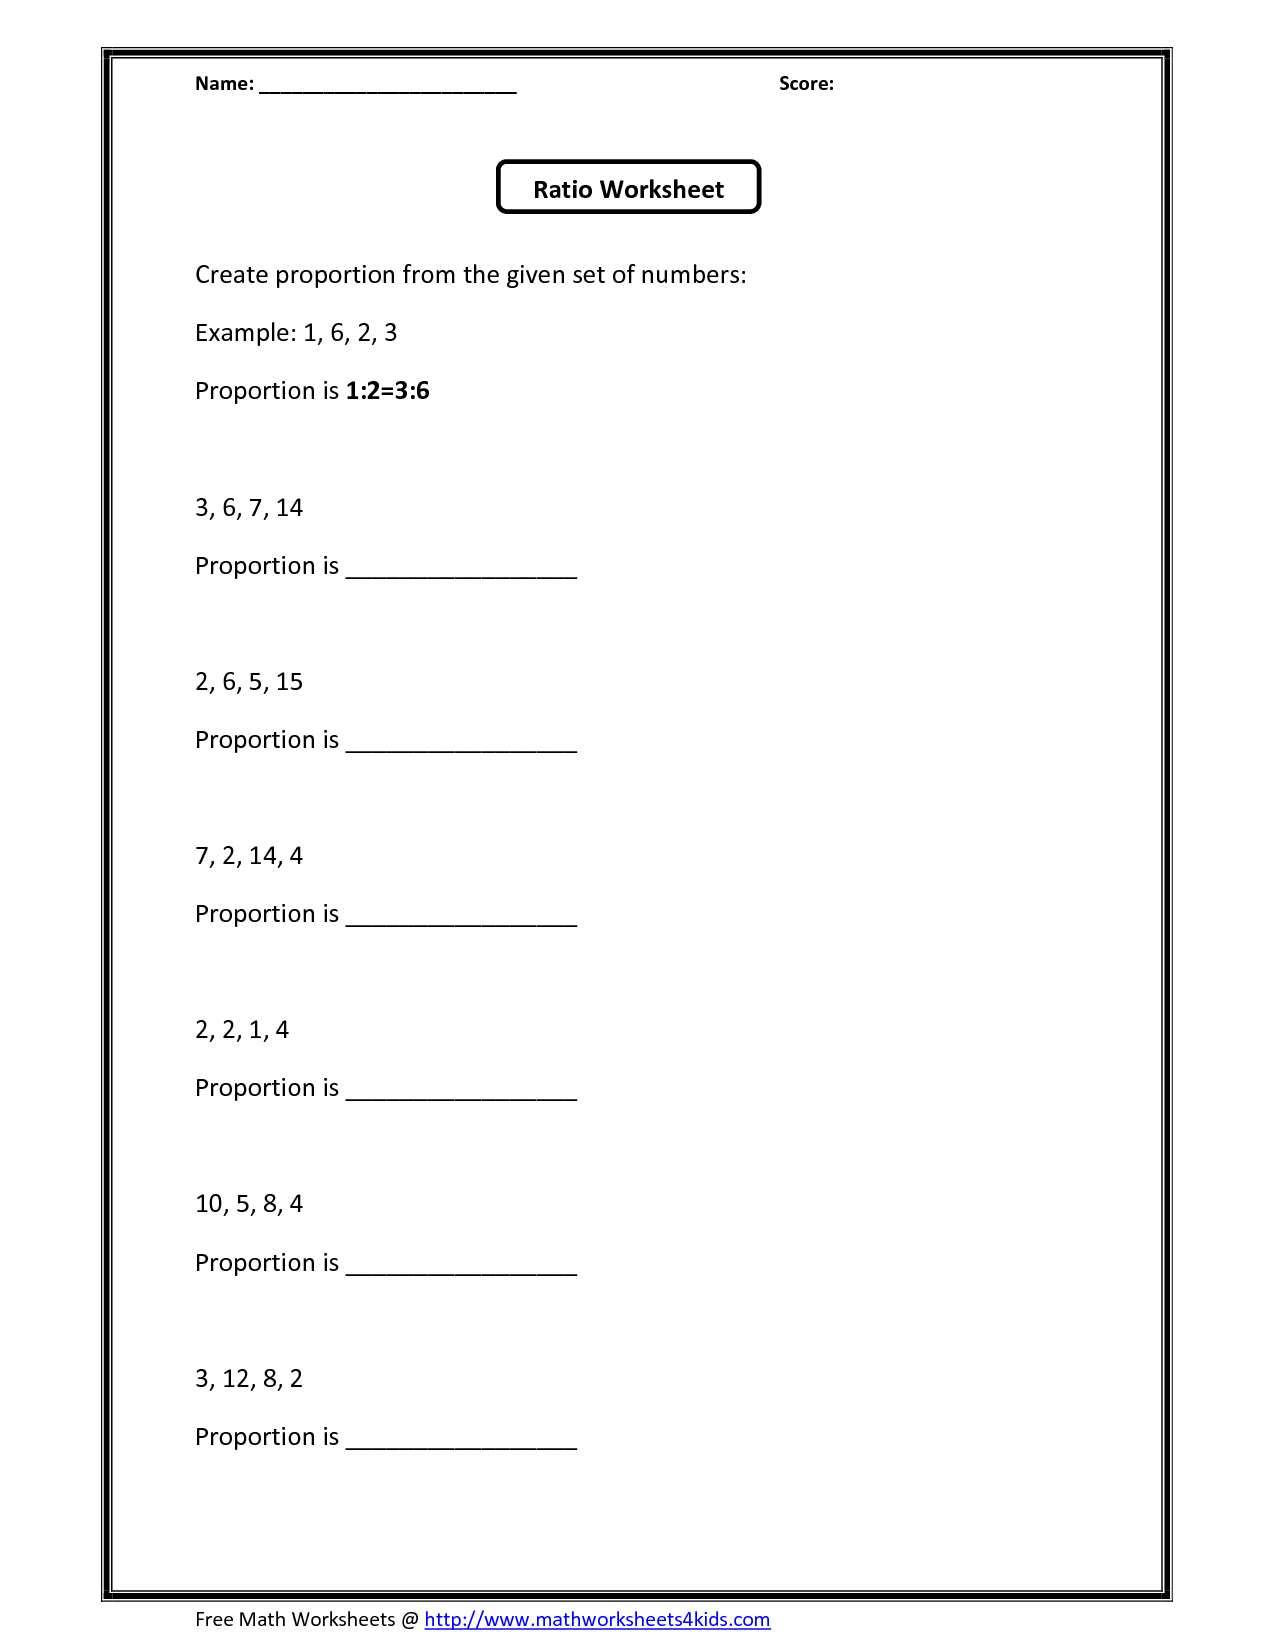 ratio-and-proportion-word-problems-worksheet-with-answers-pdf-inspiredeck